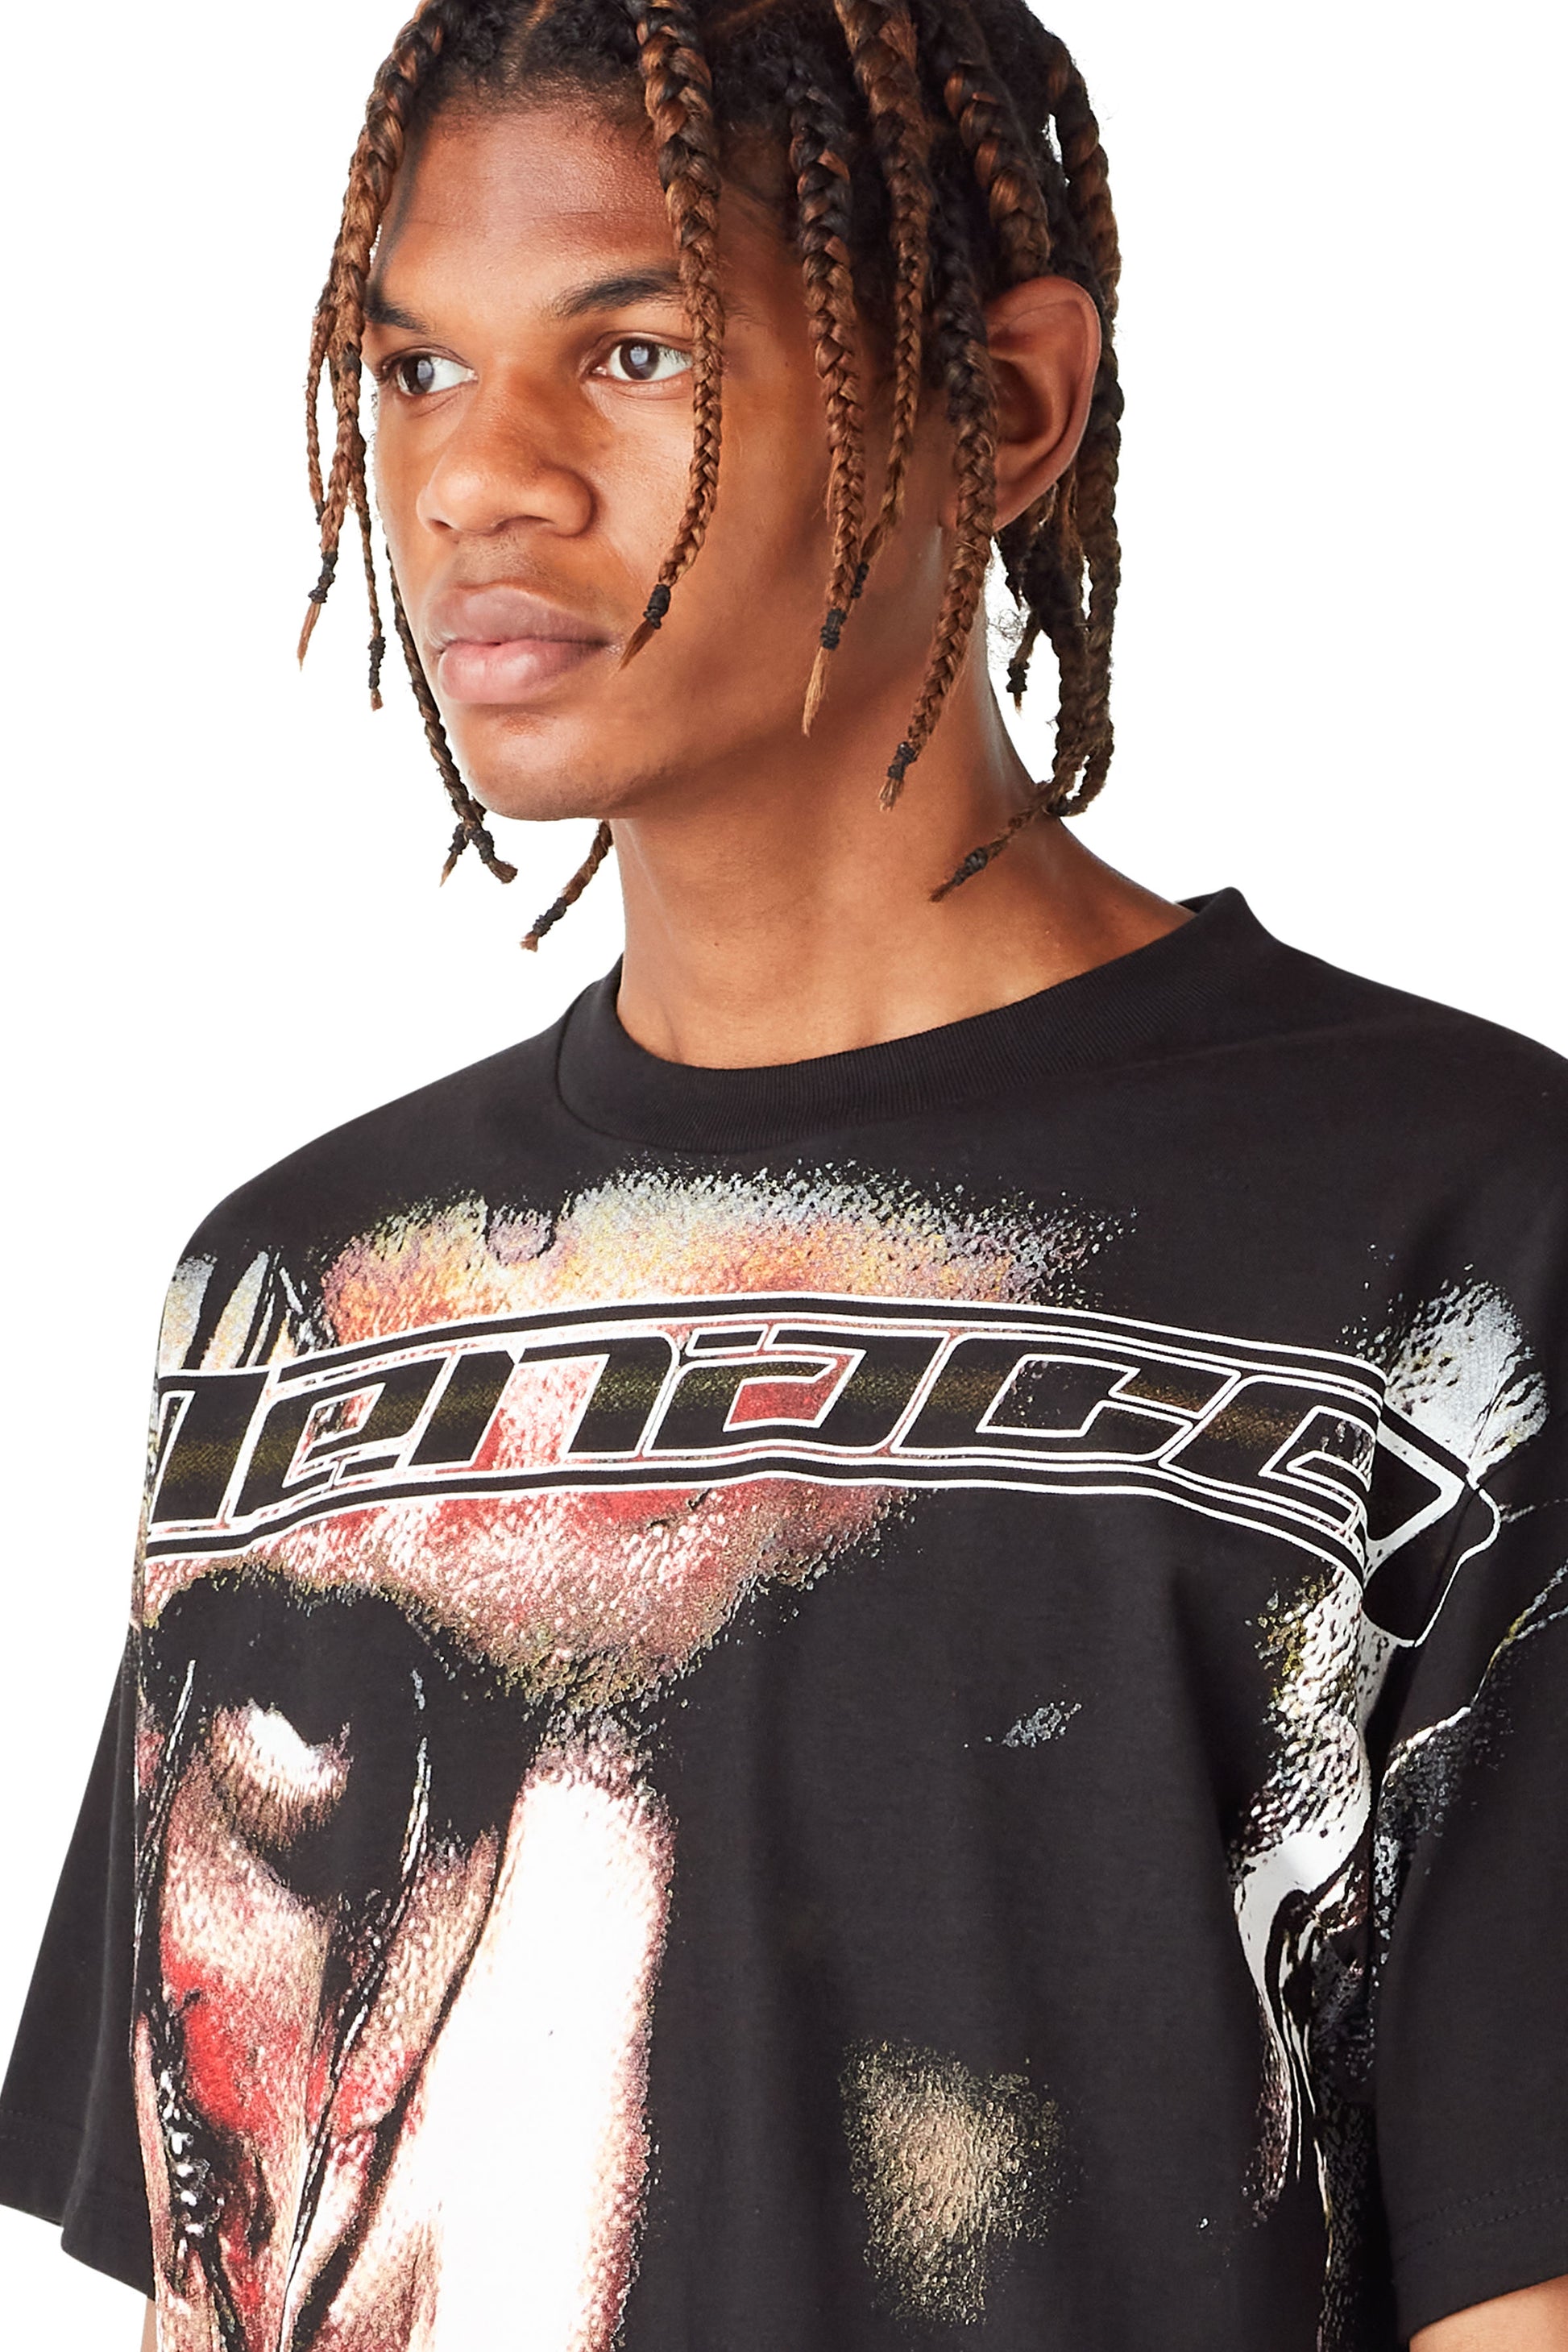 CONTRA T-SHIRT (OVERSIZED PRINT) by MENACE